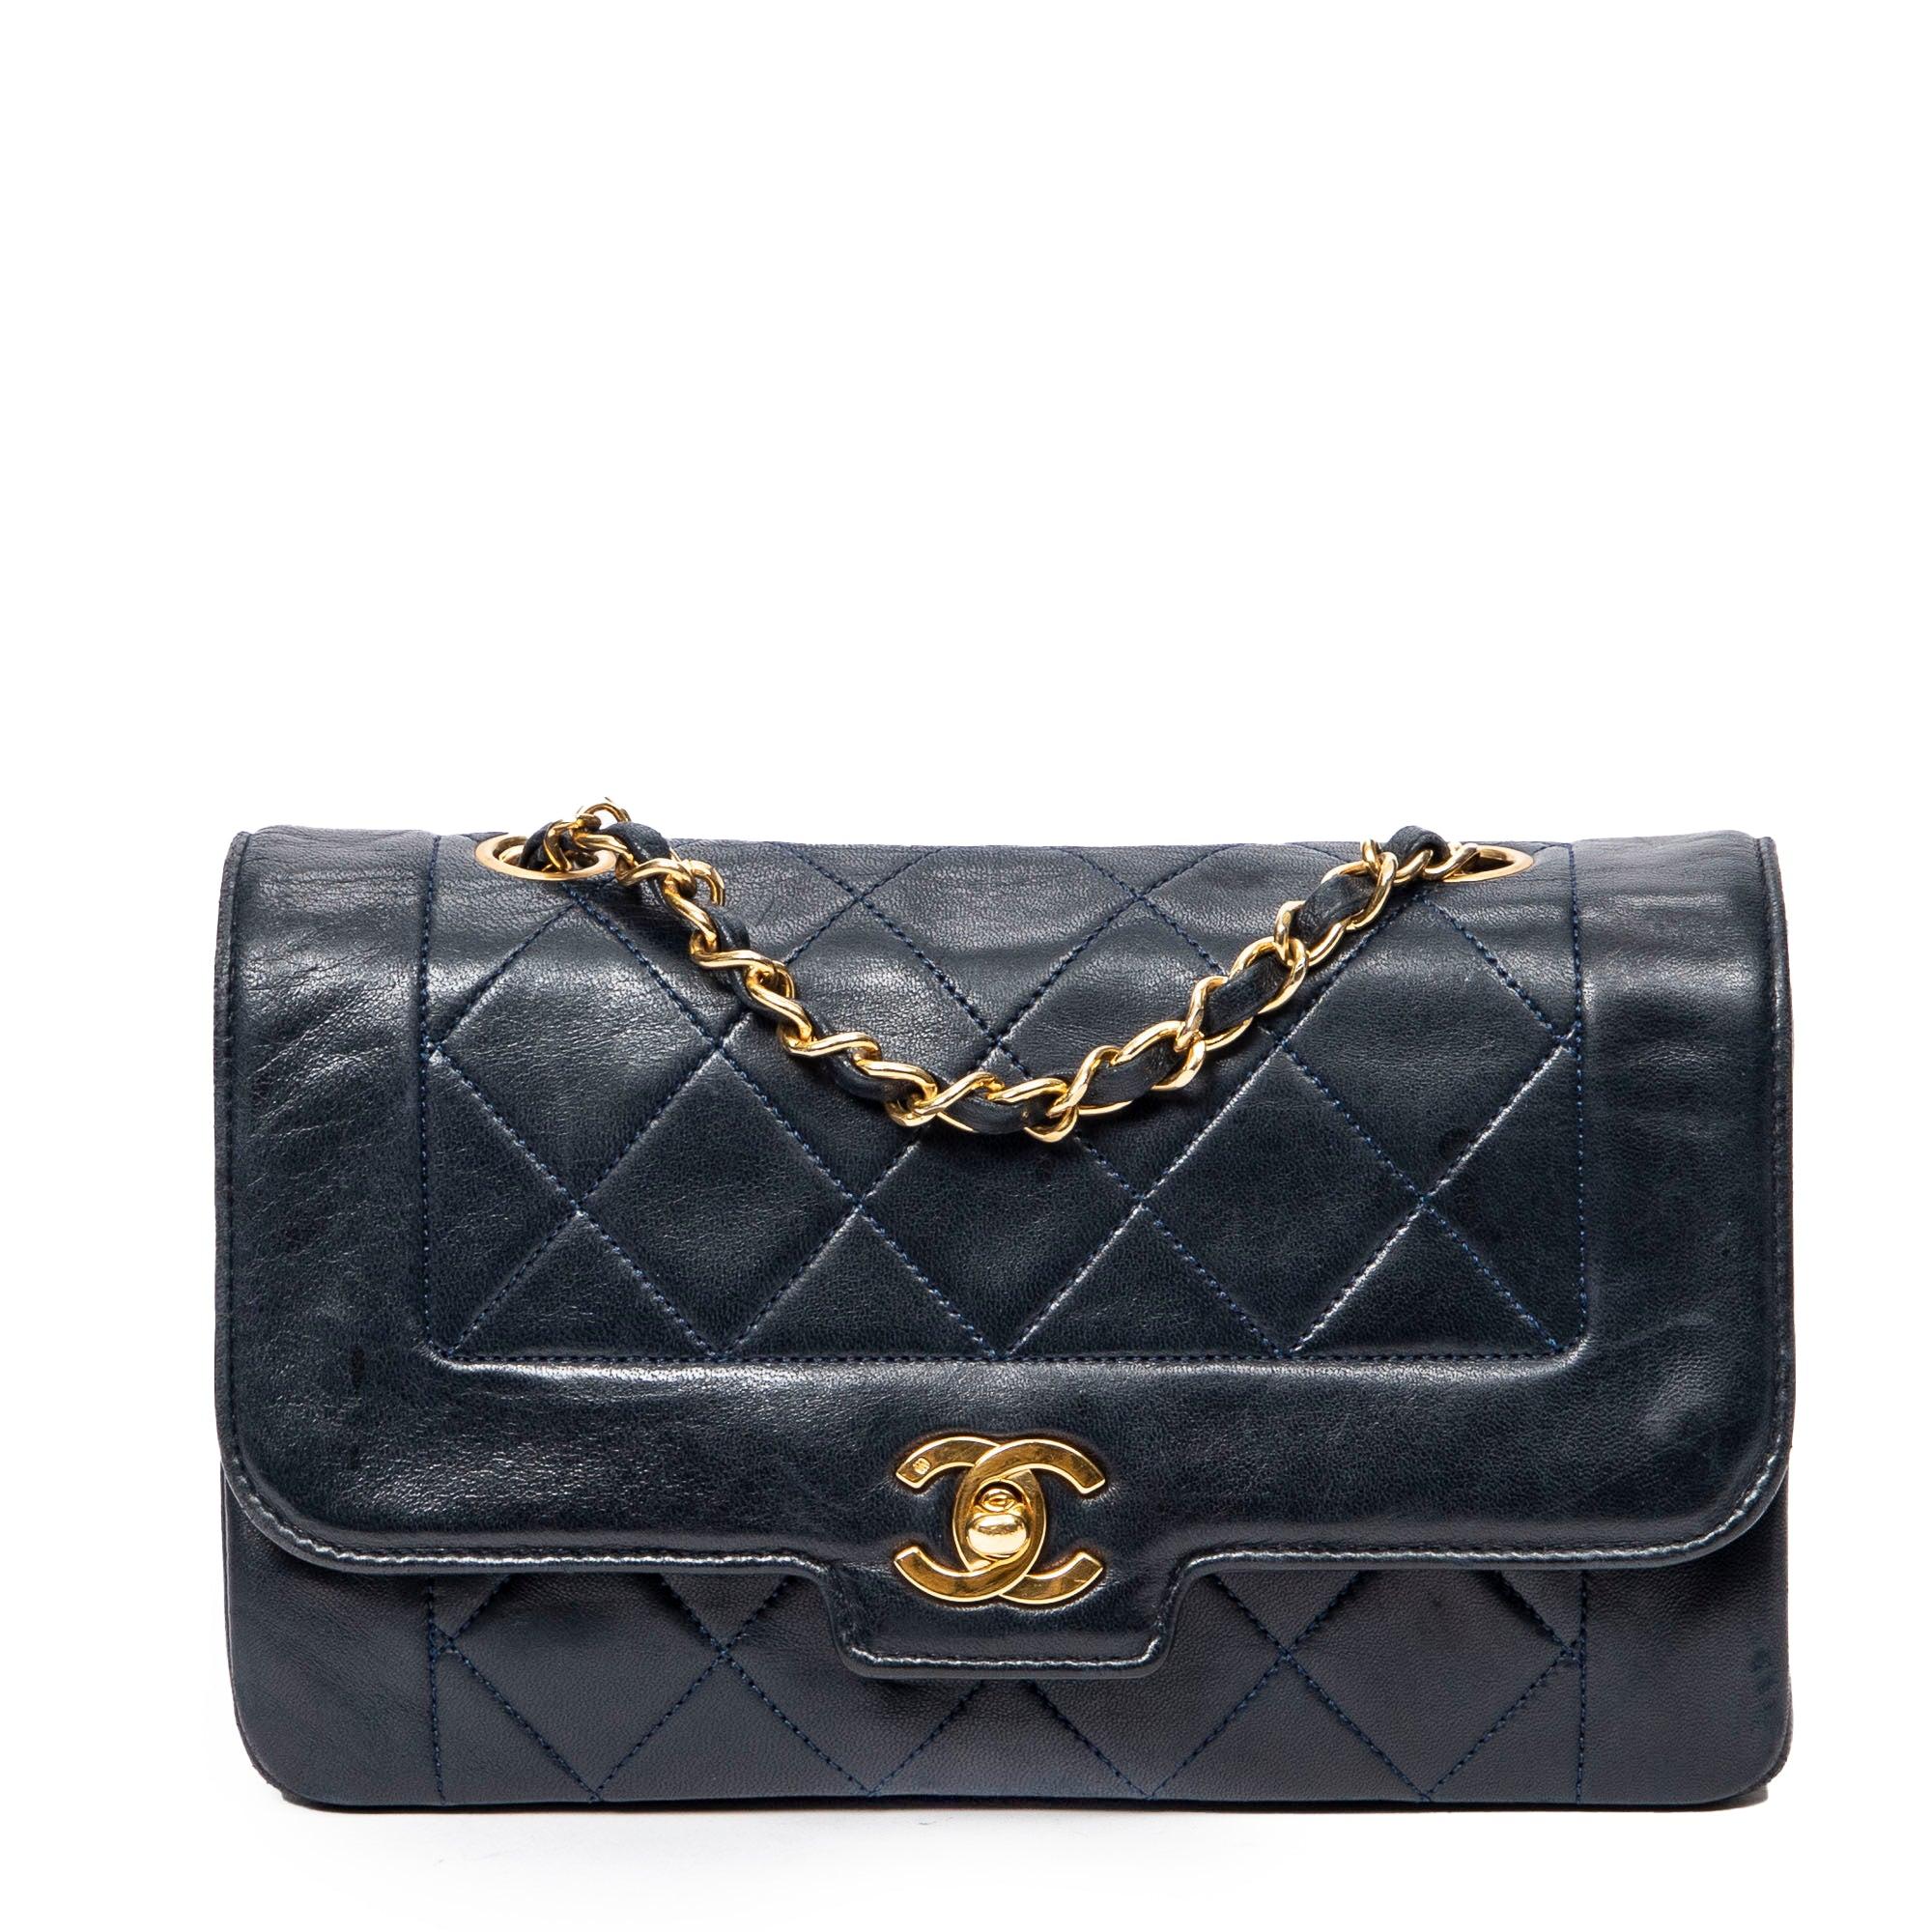 Chanel K34 Chanel 10 Diana Classic Black Quilted Leather Shoulder